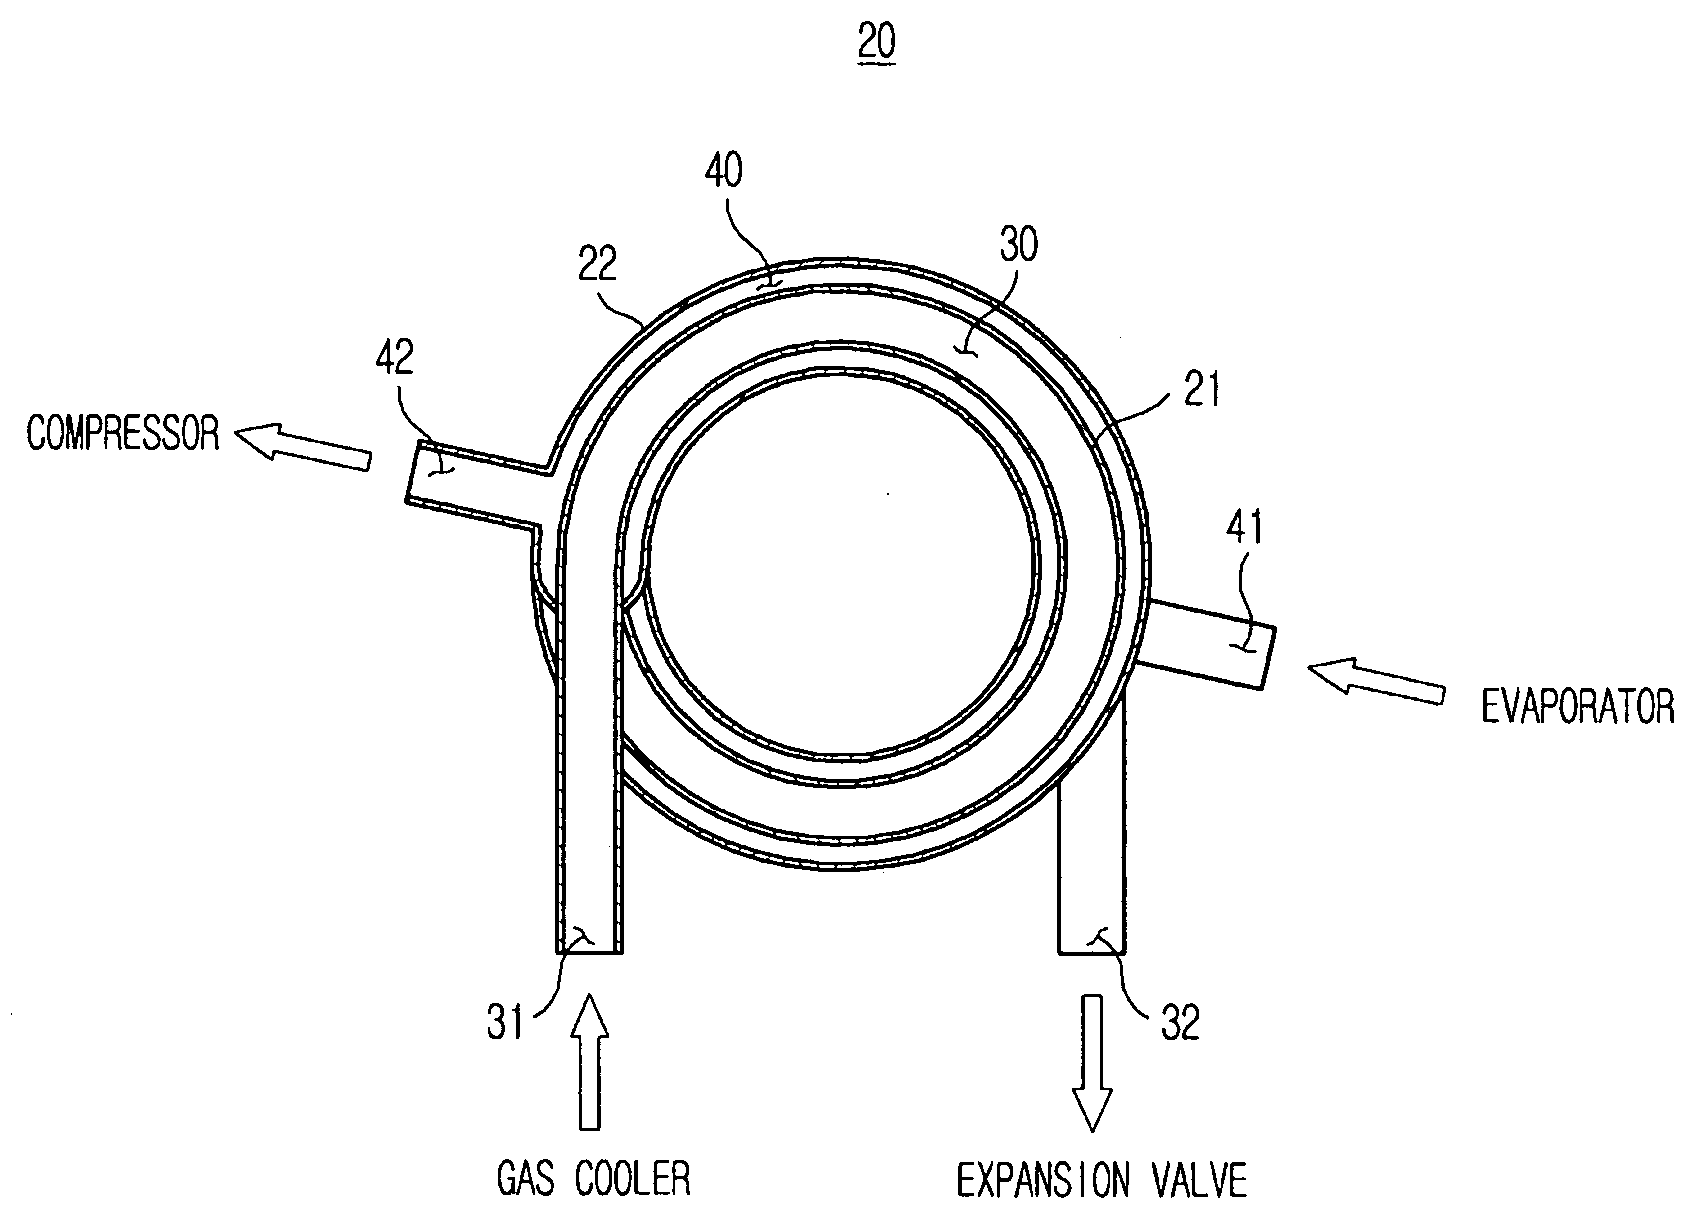 Refrigerant cycle device